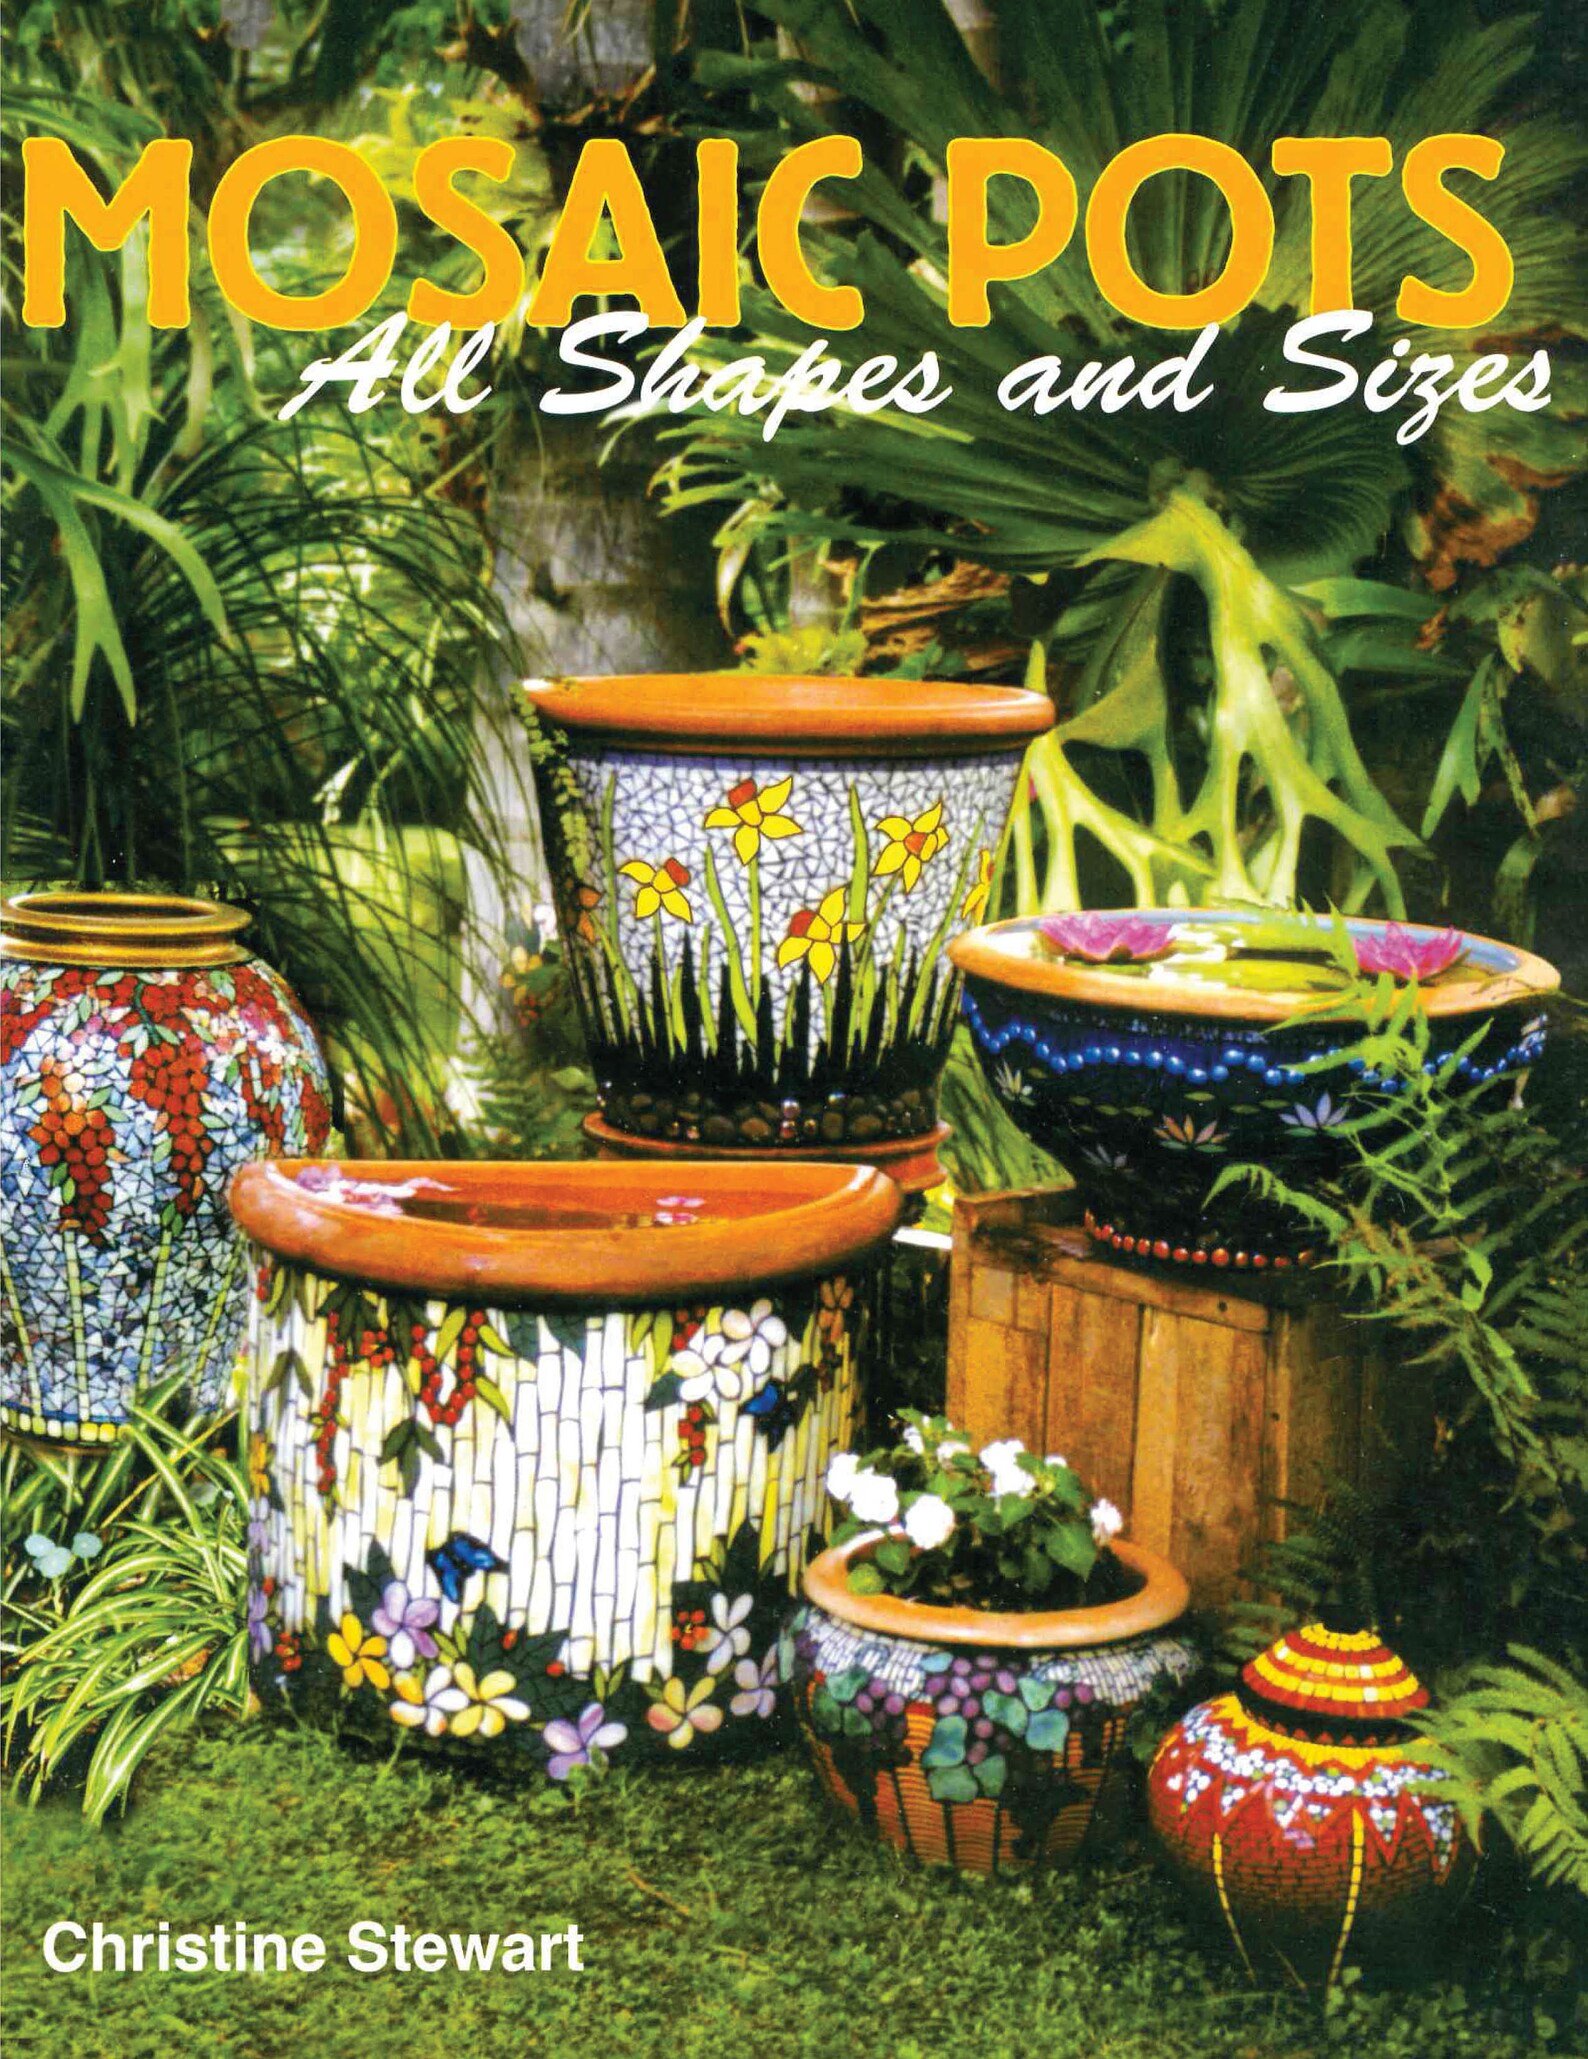  Mosaic Pots - All Shapes and Sizes. By Christine Stewart 